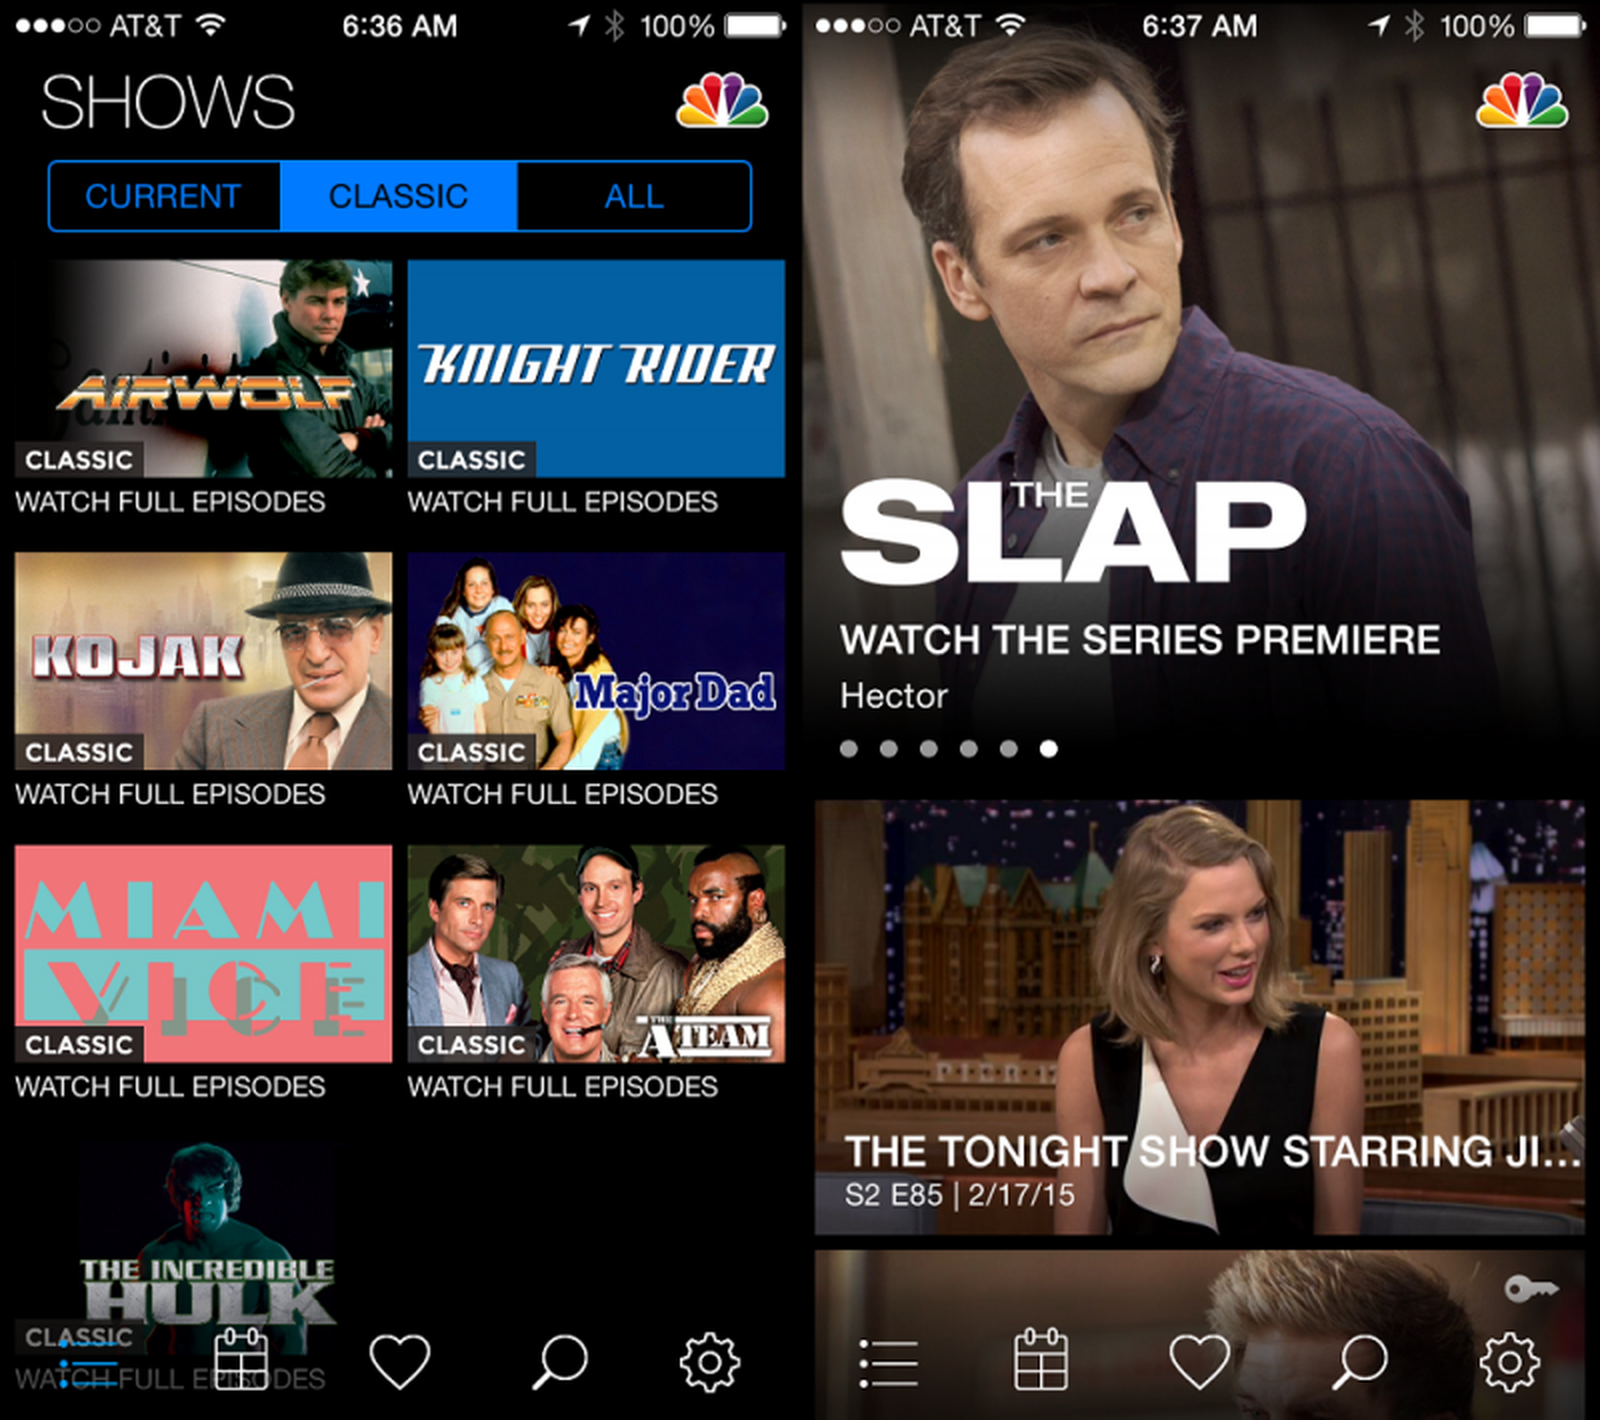 get more credits for nbc app